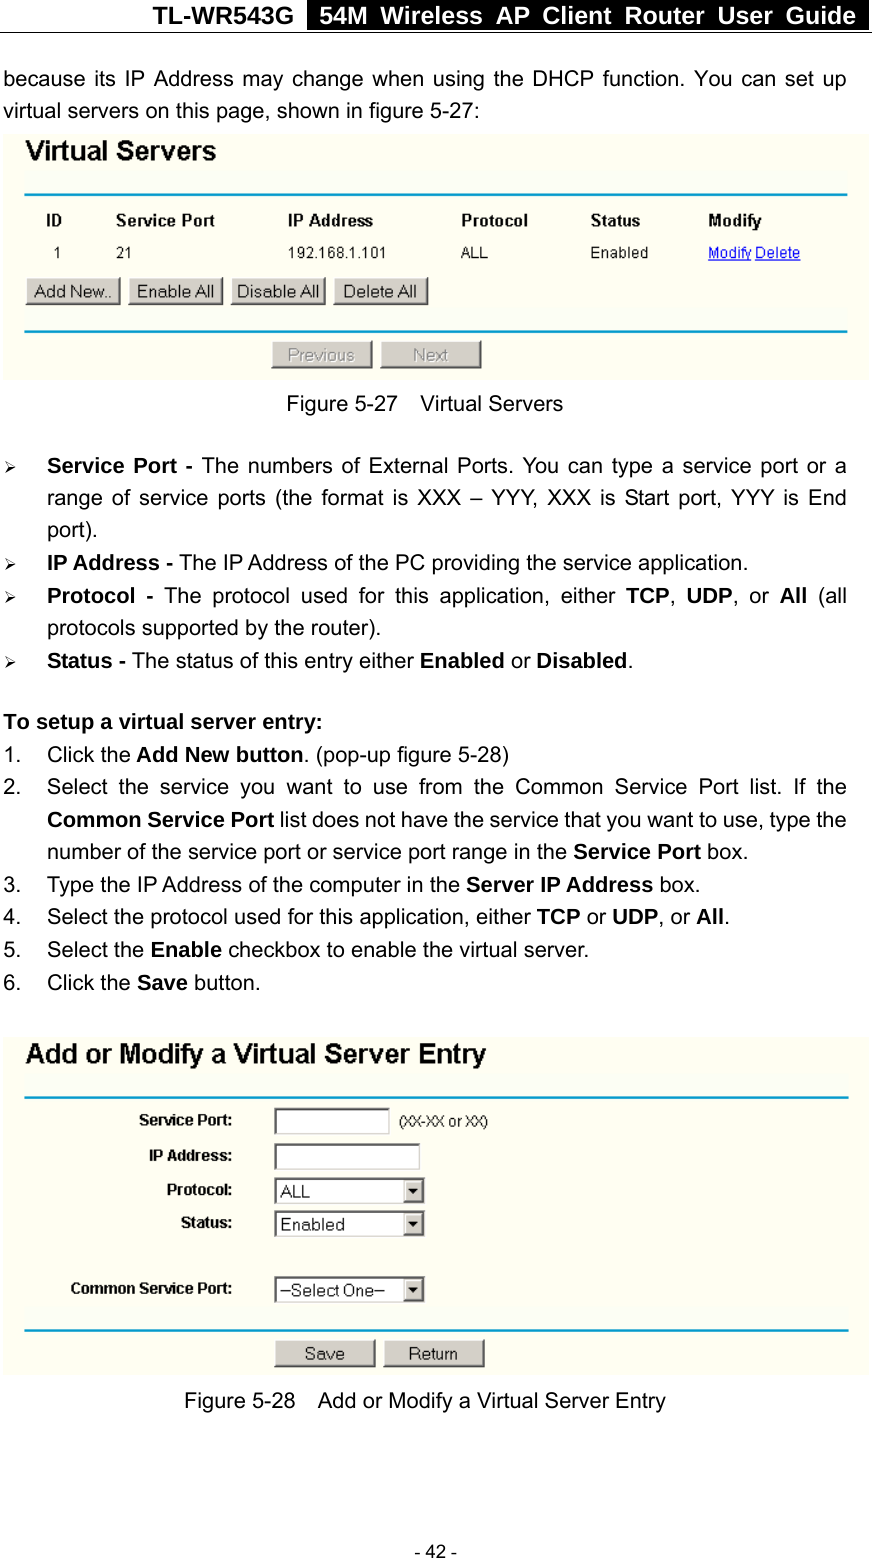 TL-WR543G   54M Wireless AP Client Router User Guide  because its IP Address may change when using the DHCP function. You can set up virtual servers on this page, shown in figure 5-27:  Figure 5-27  Virtual Servers ¾ Service Port - The numbers of External Ports. You can type a service port or a range of service ports (the format is XXX – YYY, XXX is Start port, YYY is End port).  ¾ IP Address - The IP Address of the PC providing the service application. ¾ Protocol - The protocol used for this application, either TCP,  UDP, or All  (all protocols supported by the router). ¾ Status - The status of this entry either Enabled or Disabled. To setup a virtual server entry:   1. Click the Add New button. (pop-up figure 5-28) 2.  Select the service you want to use from the Common Service Port list. If the Common Service Port list does not have the service that you want to use, type the number of the service port or service port range in the Service Port box. 3.  Type the IP Address of the computer in the Server IP Address box.  4.  Select the protocol used for this application, either TCP or UDP, or All. 5. Select the Enable checkbox to enable the virtual server. 6. Click the Save button.    Figure 5-28    Add or Modify a Virtual Server Entry  - 42 - 